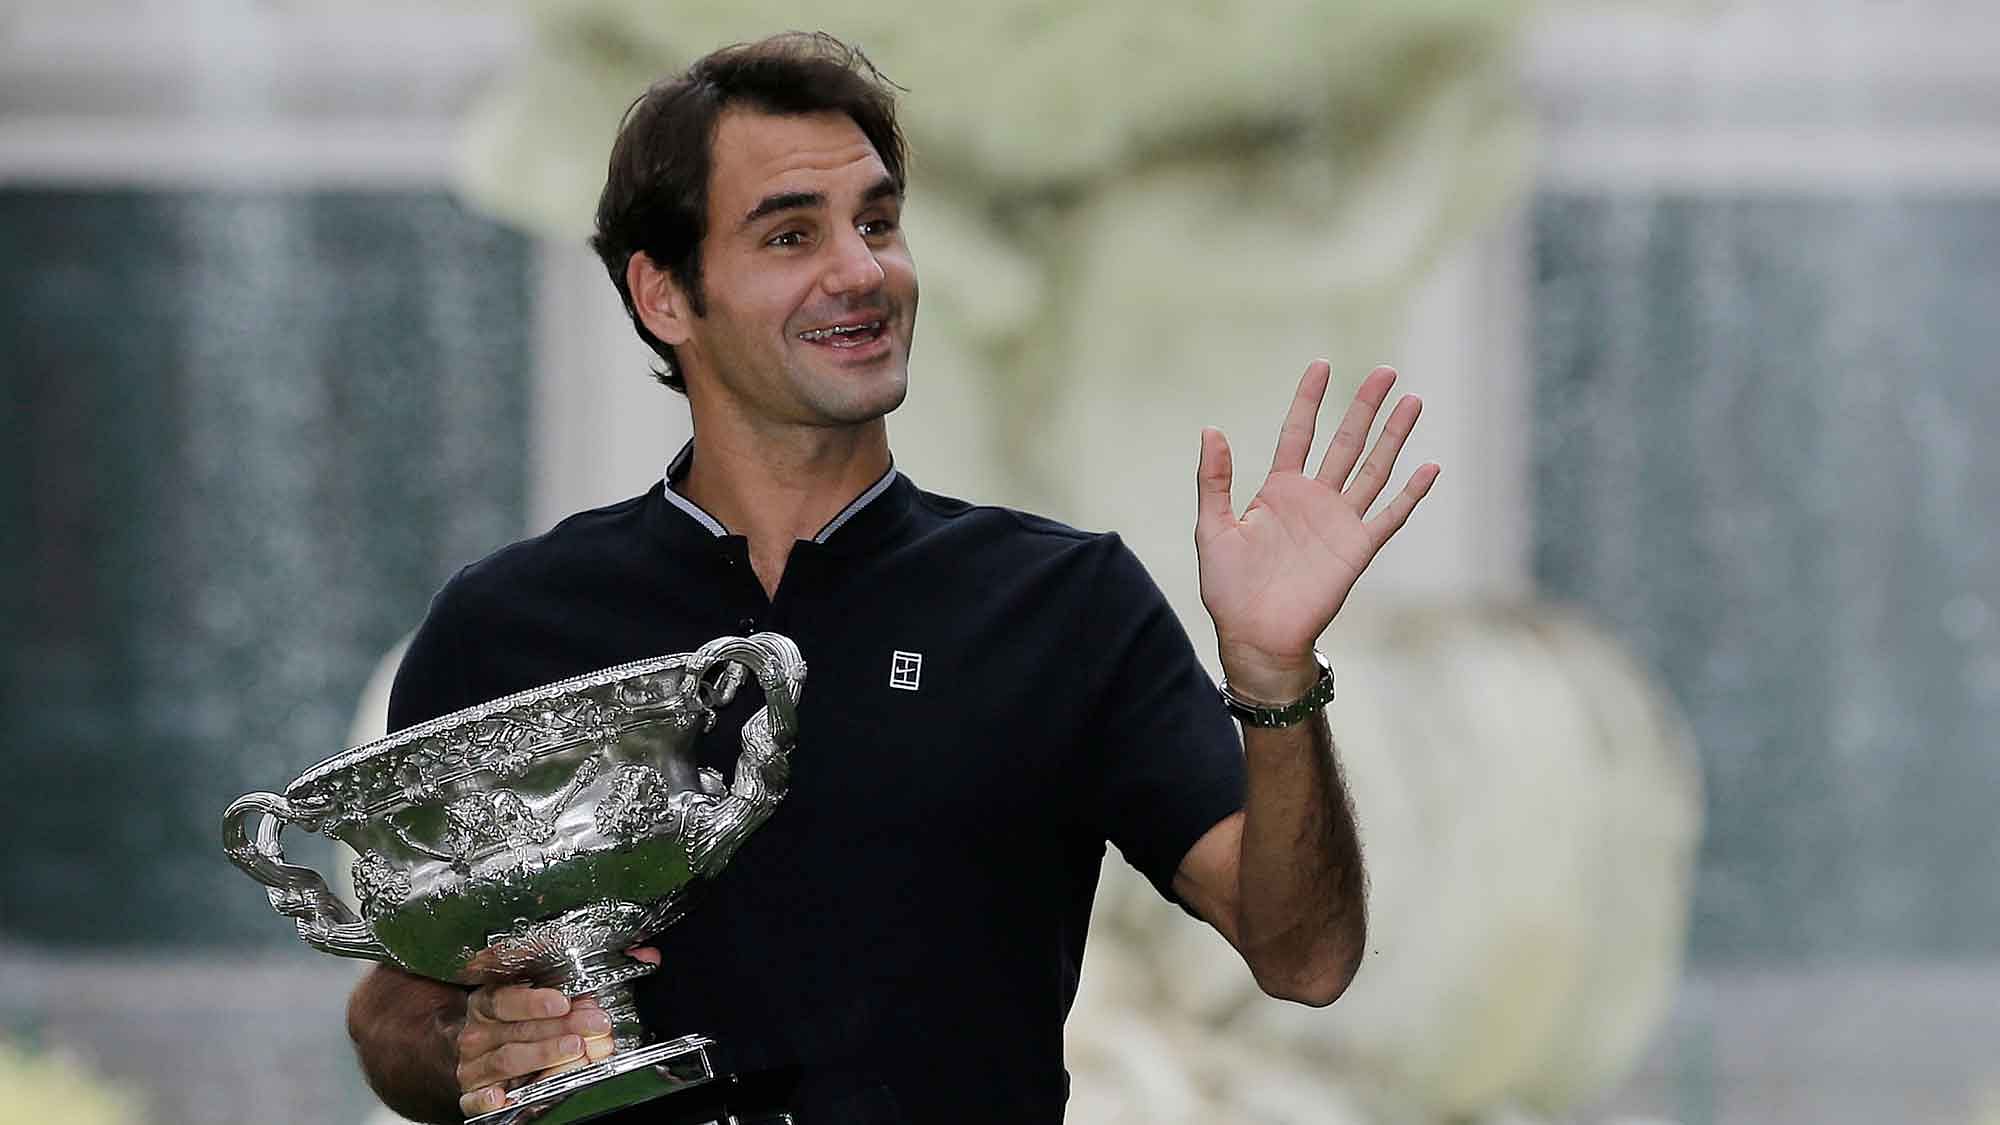 Switzerland’s Roger Federer waves to fans as he holds his Australian Open trophy at Carlton Gardens in Melbourne, Australia. (Photo: AP)